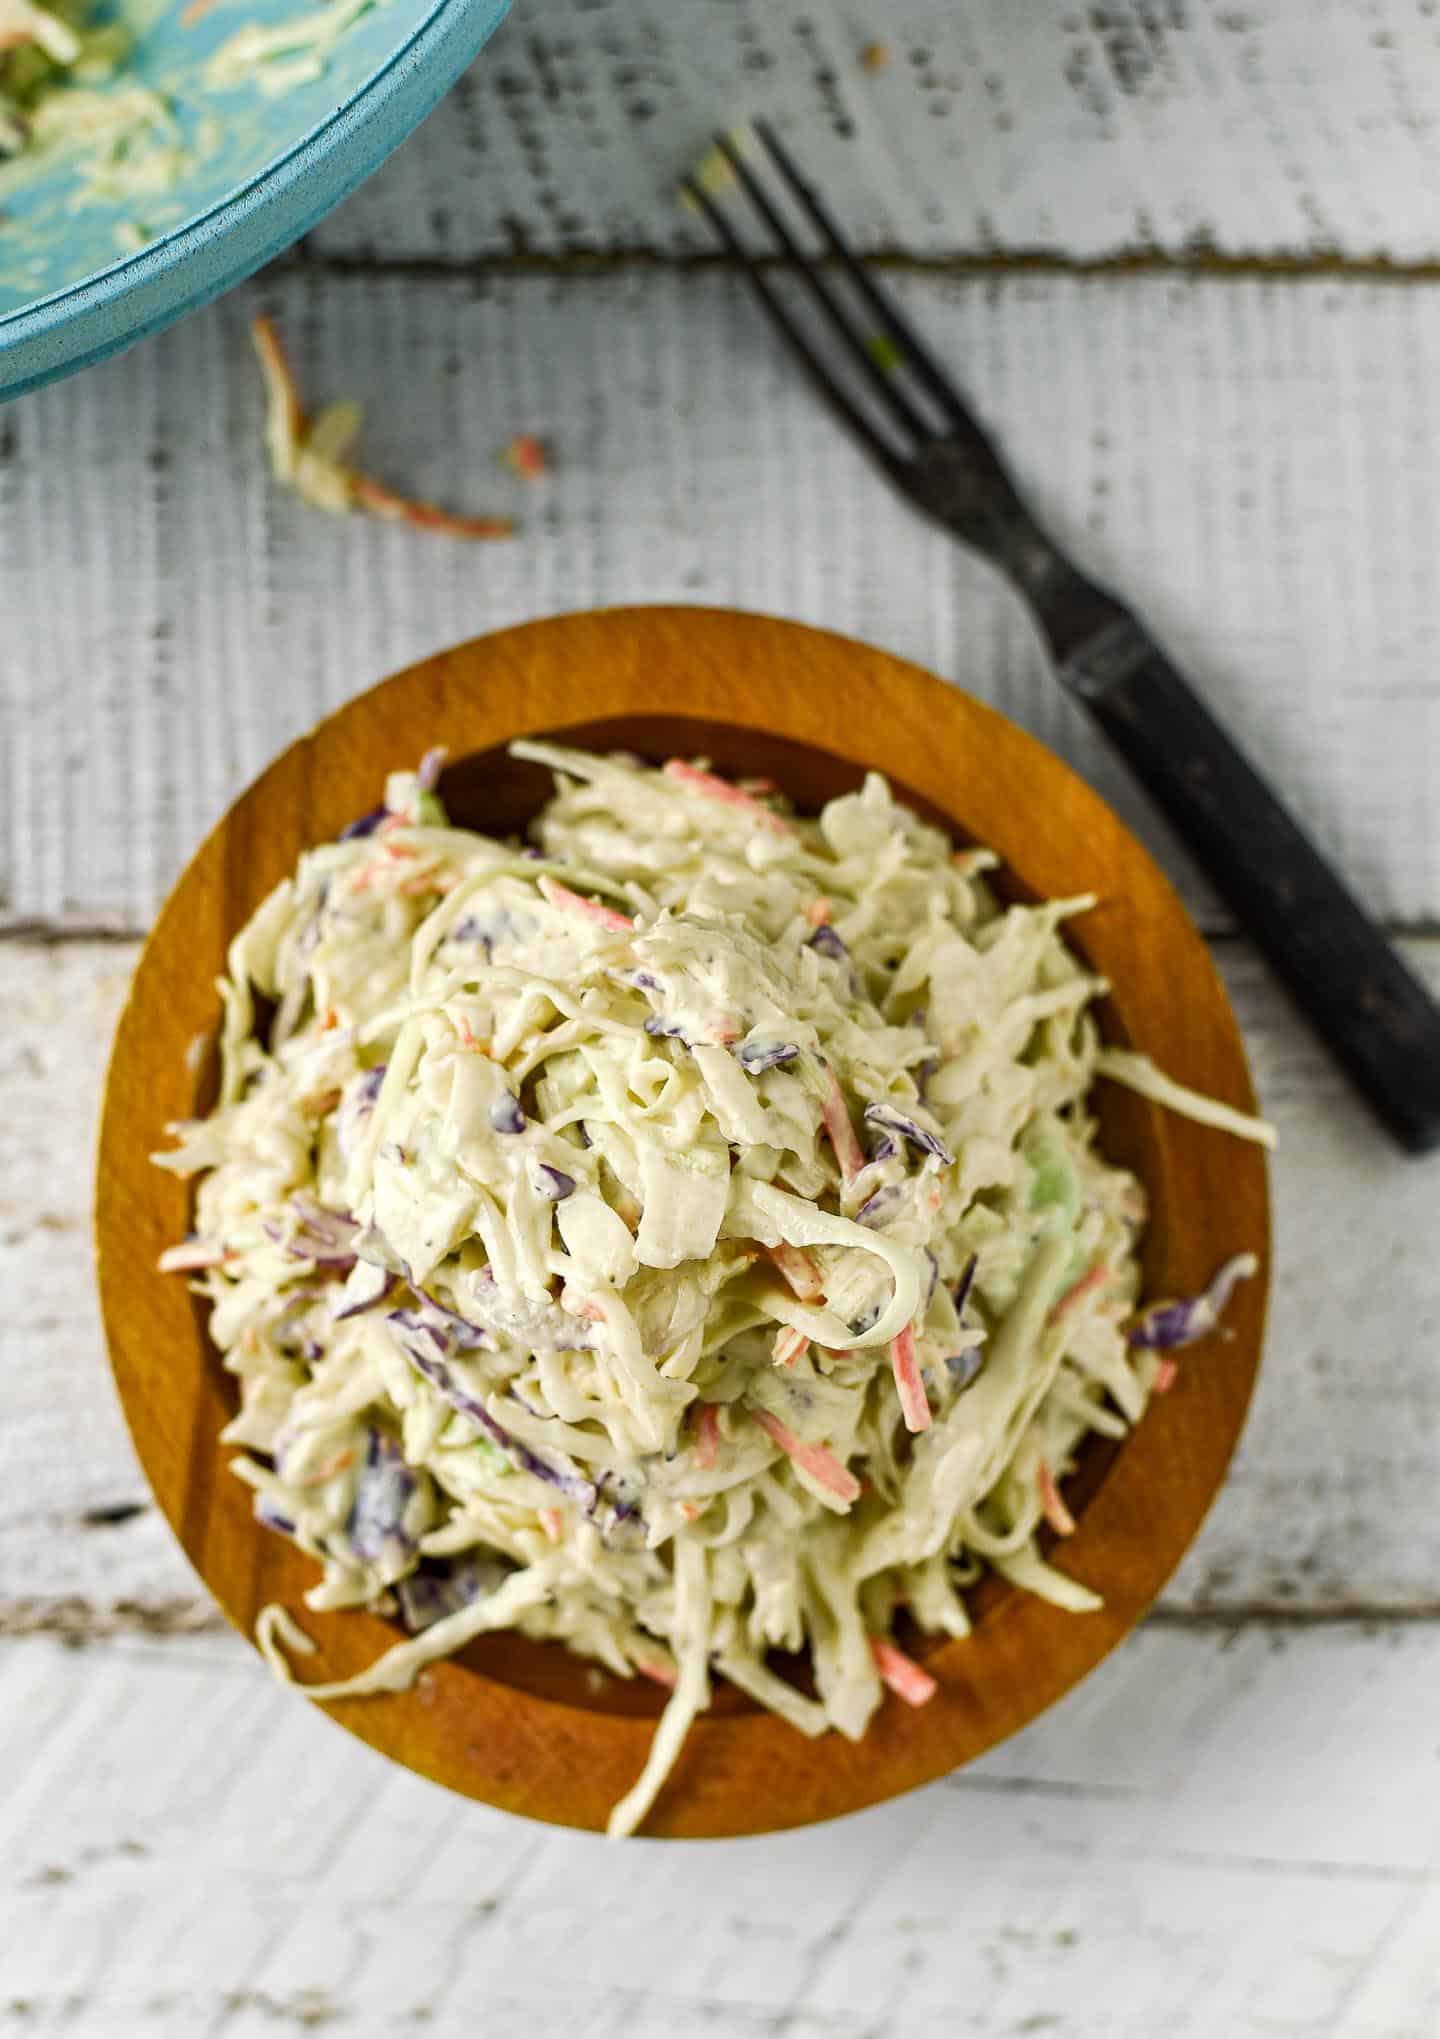 Easy Vegan Coleslaw is creamy, delicious, and so easy to make. Made in one bowl with 5 ingredients, it's perfect for BBQs, picnics, and summer potlucks! Oil-free, gluten-free, and healthy.